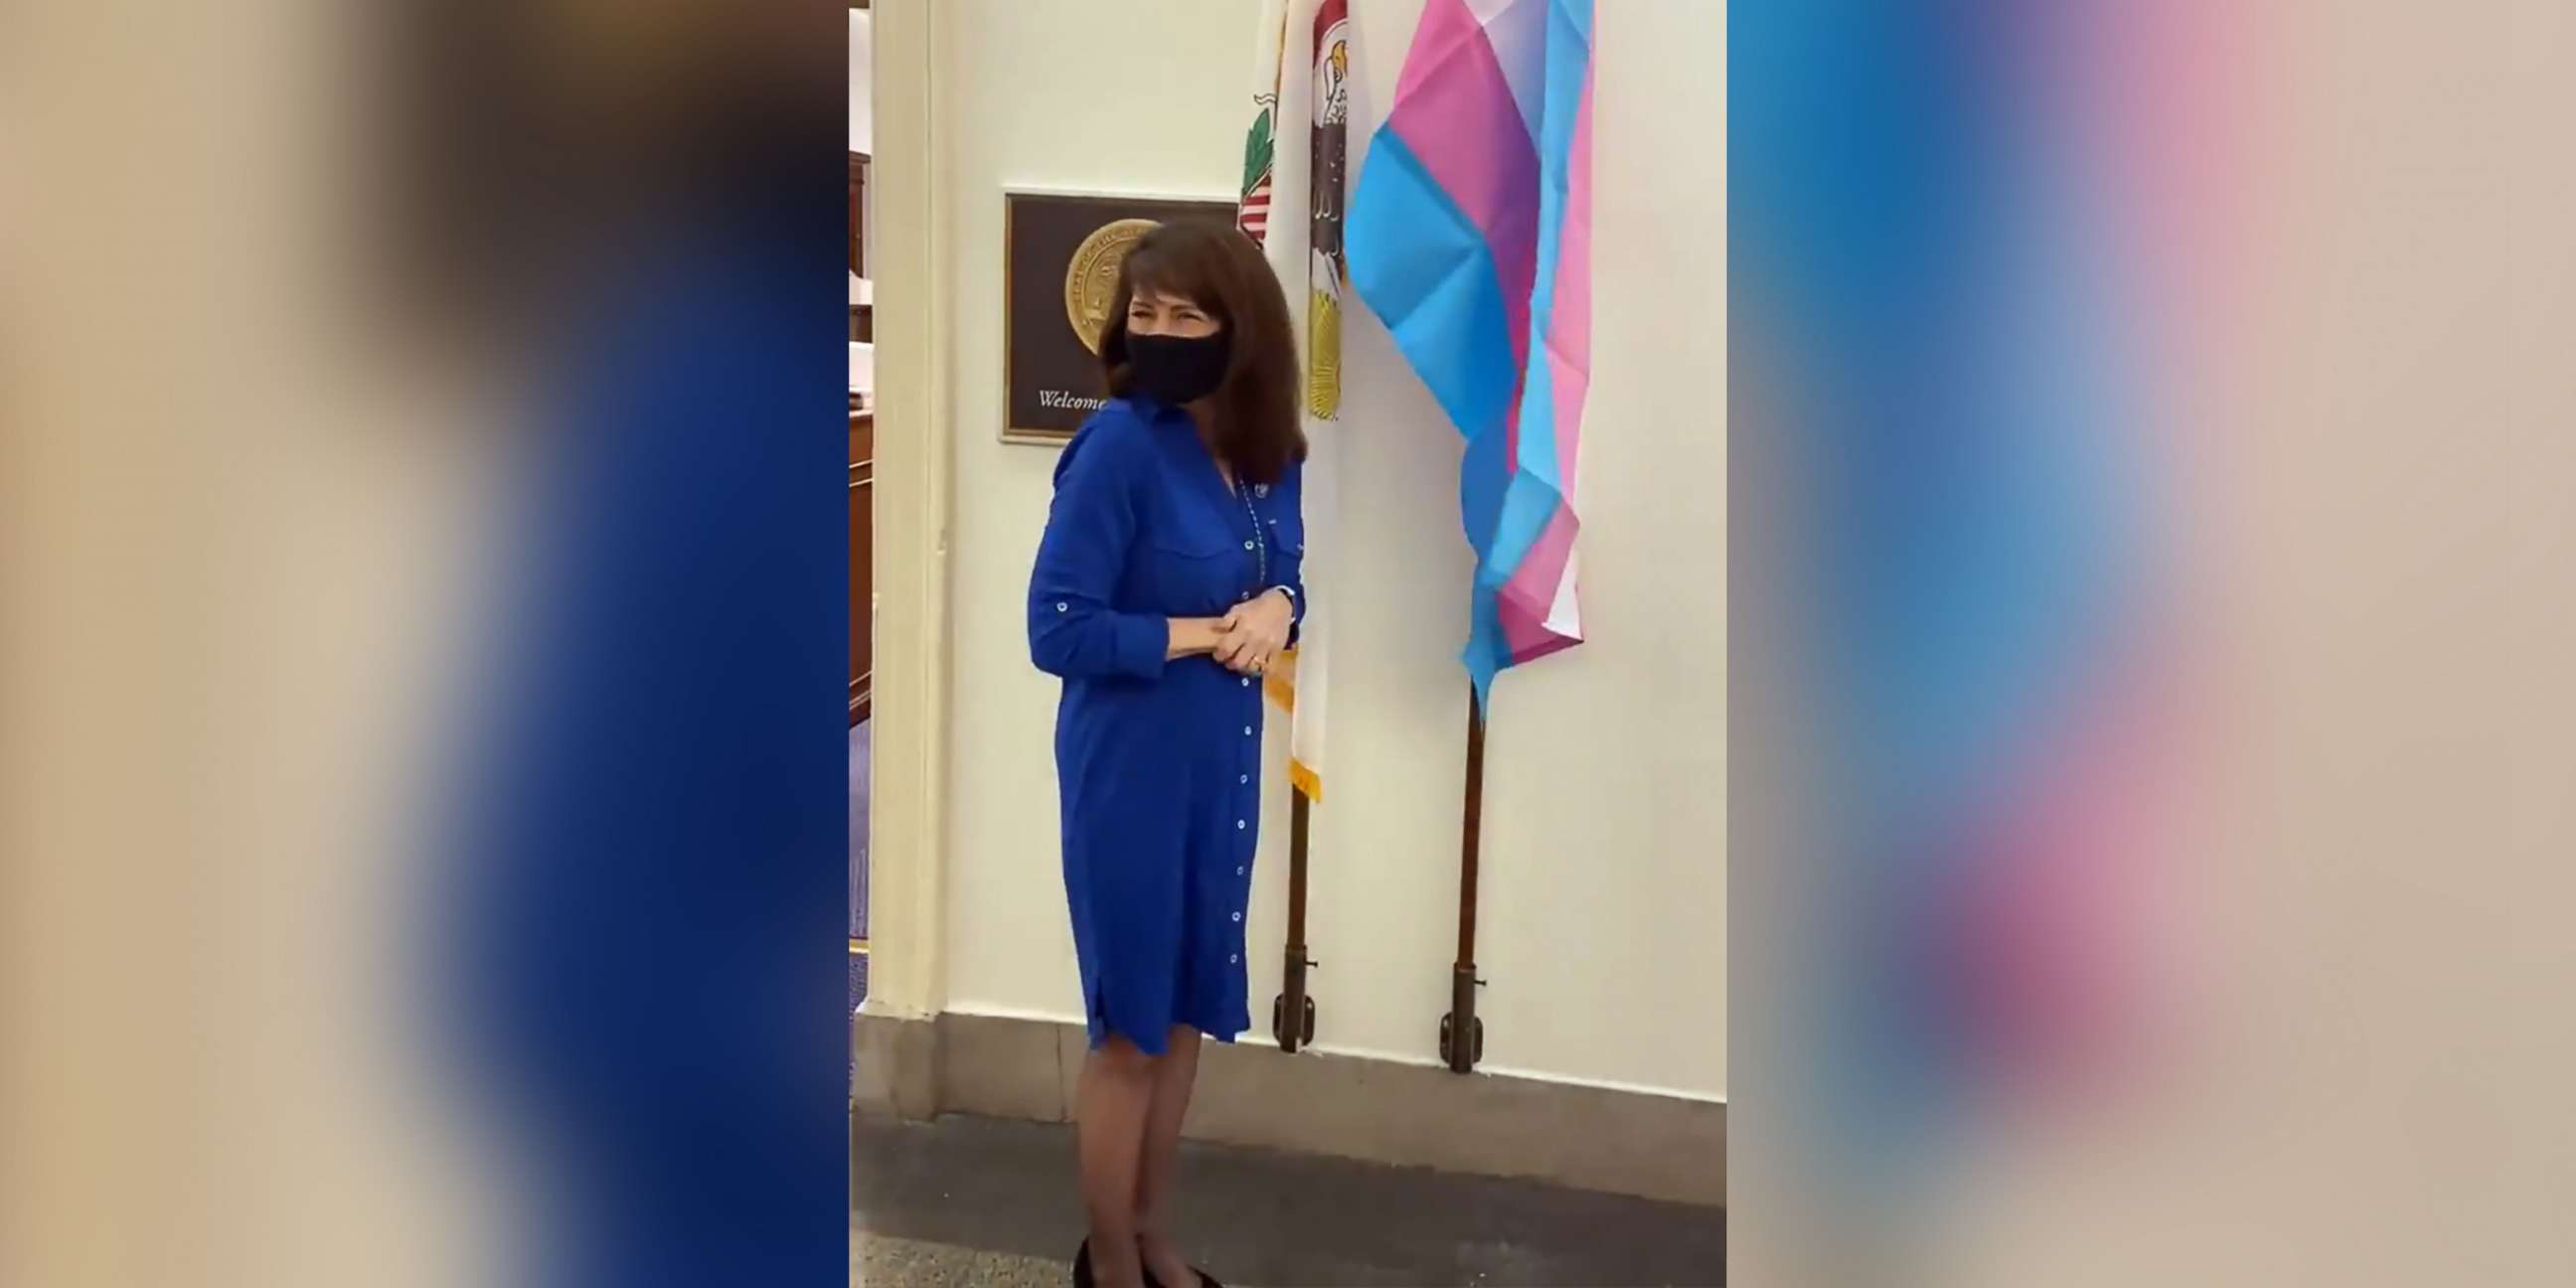 PHOTO: Rep. Marie Newman displays a transgender pride flag in front of her office in Washington, in an image made from video posted to her Twitter account on Feb. 24, 2021.